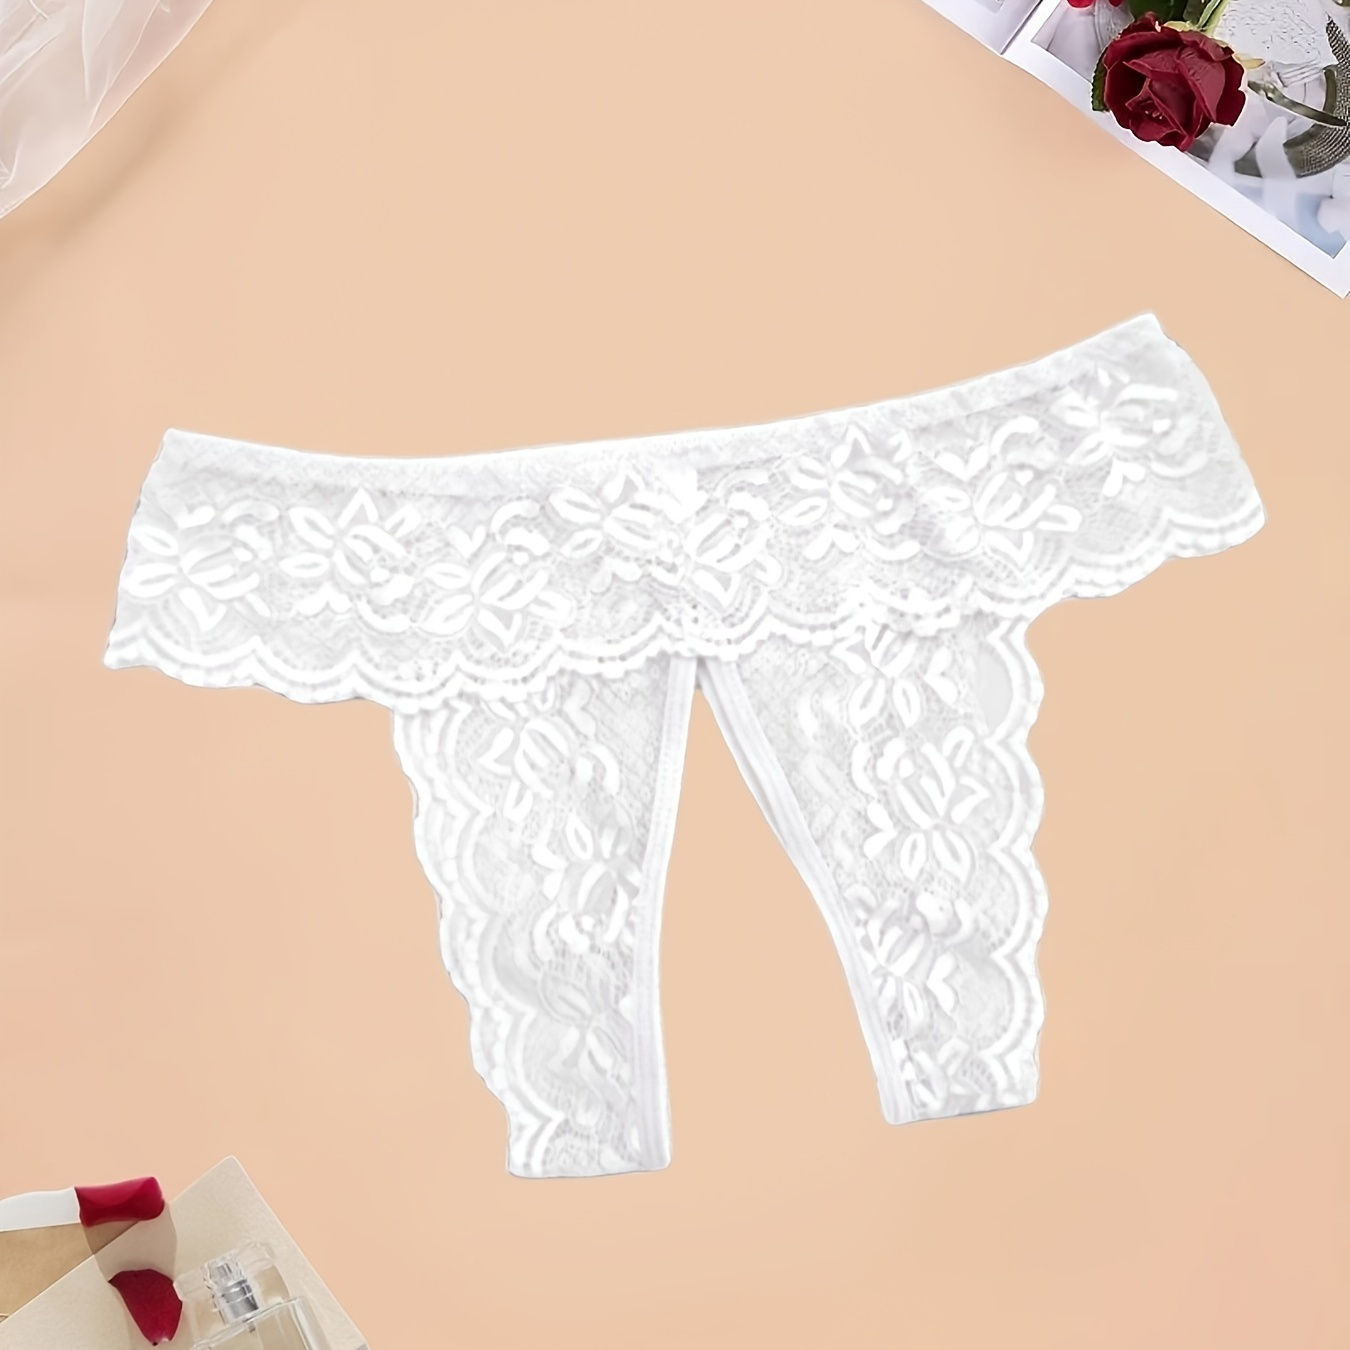 

Women's Adult Sexy Floral Lace Open Crotch Mesh Panties - Seductive See-through Lingerie & Underwear